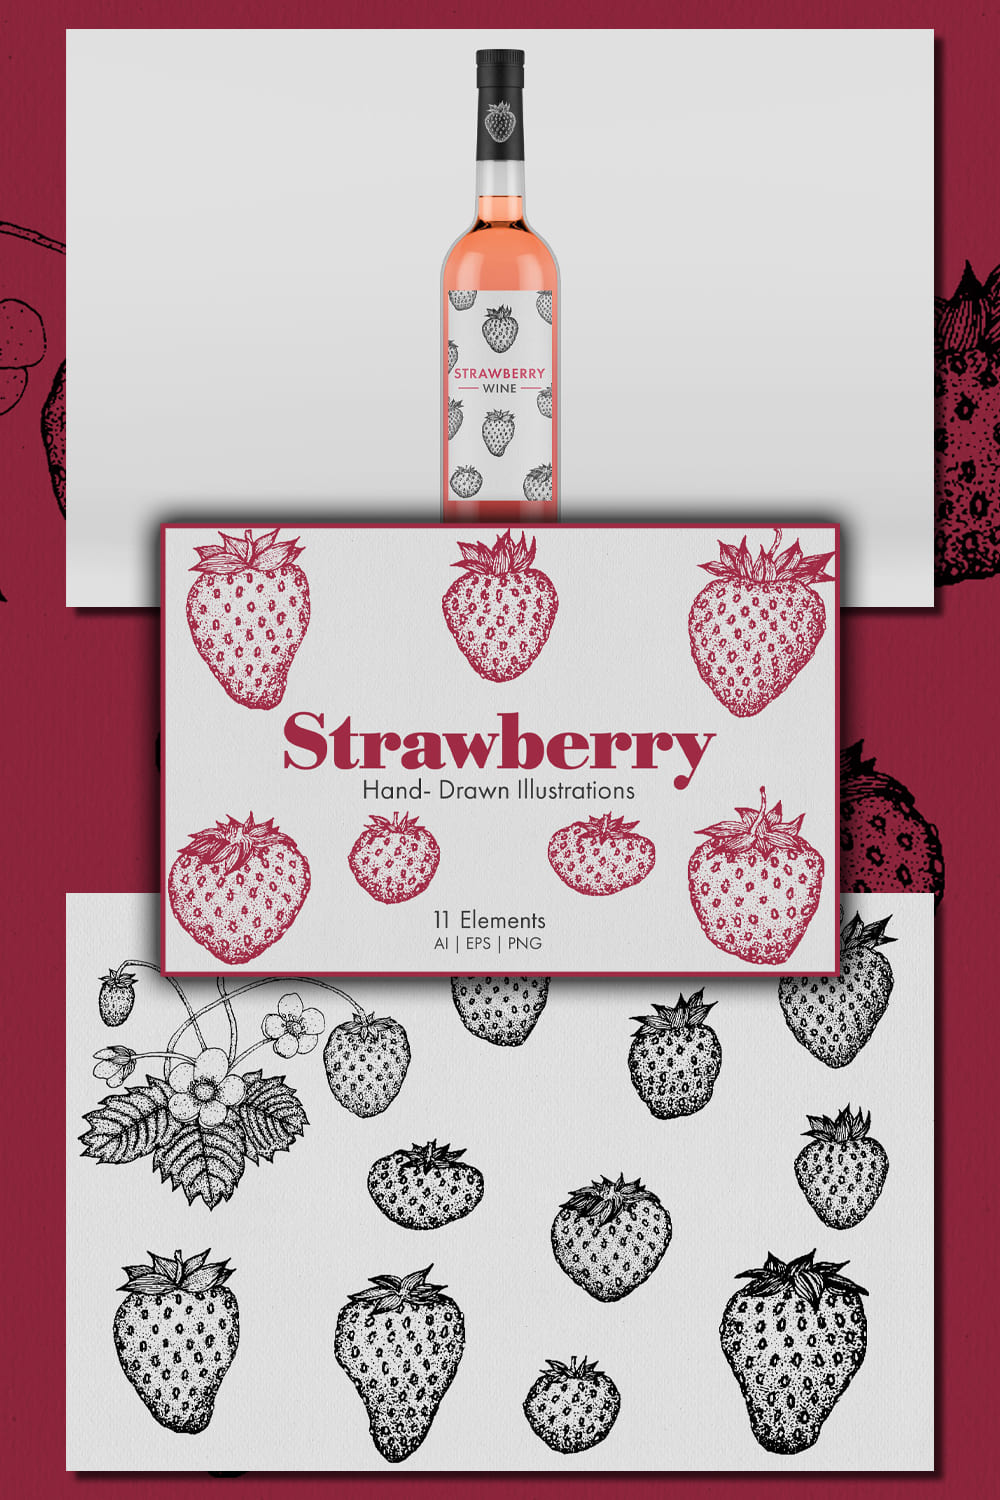 Examples of the use of illustrations of strawberries in the vintage-classical style.